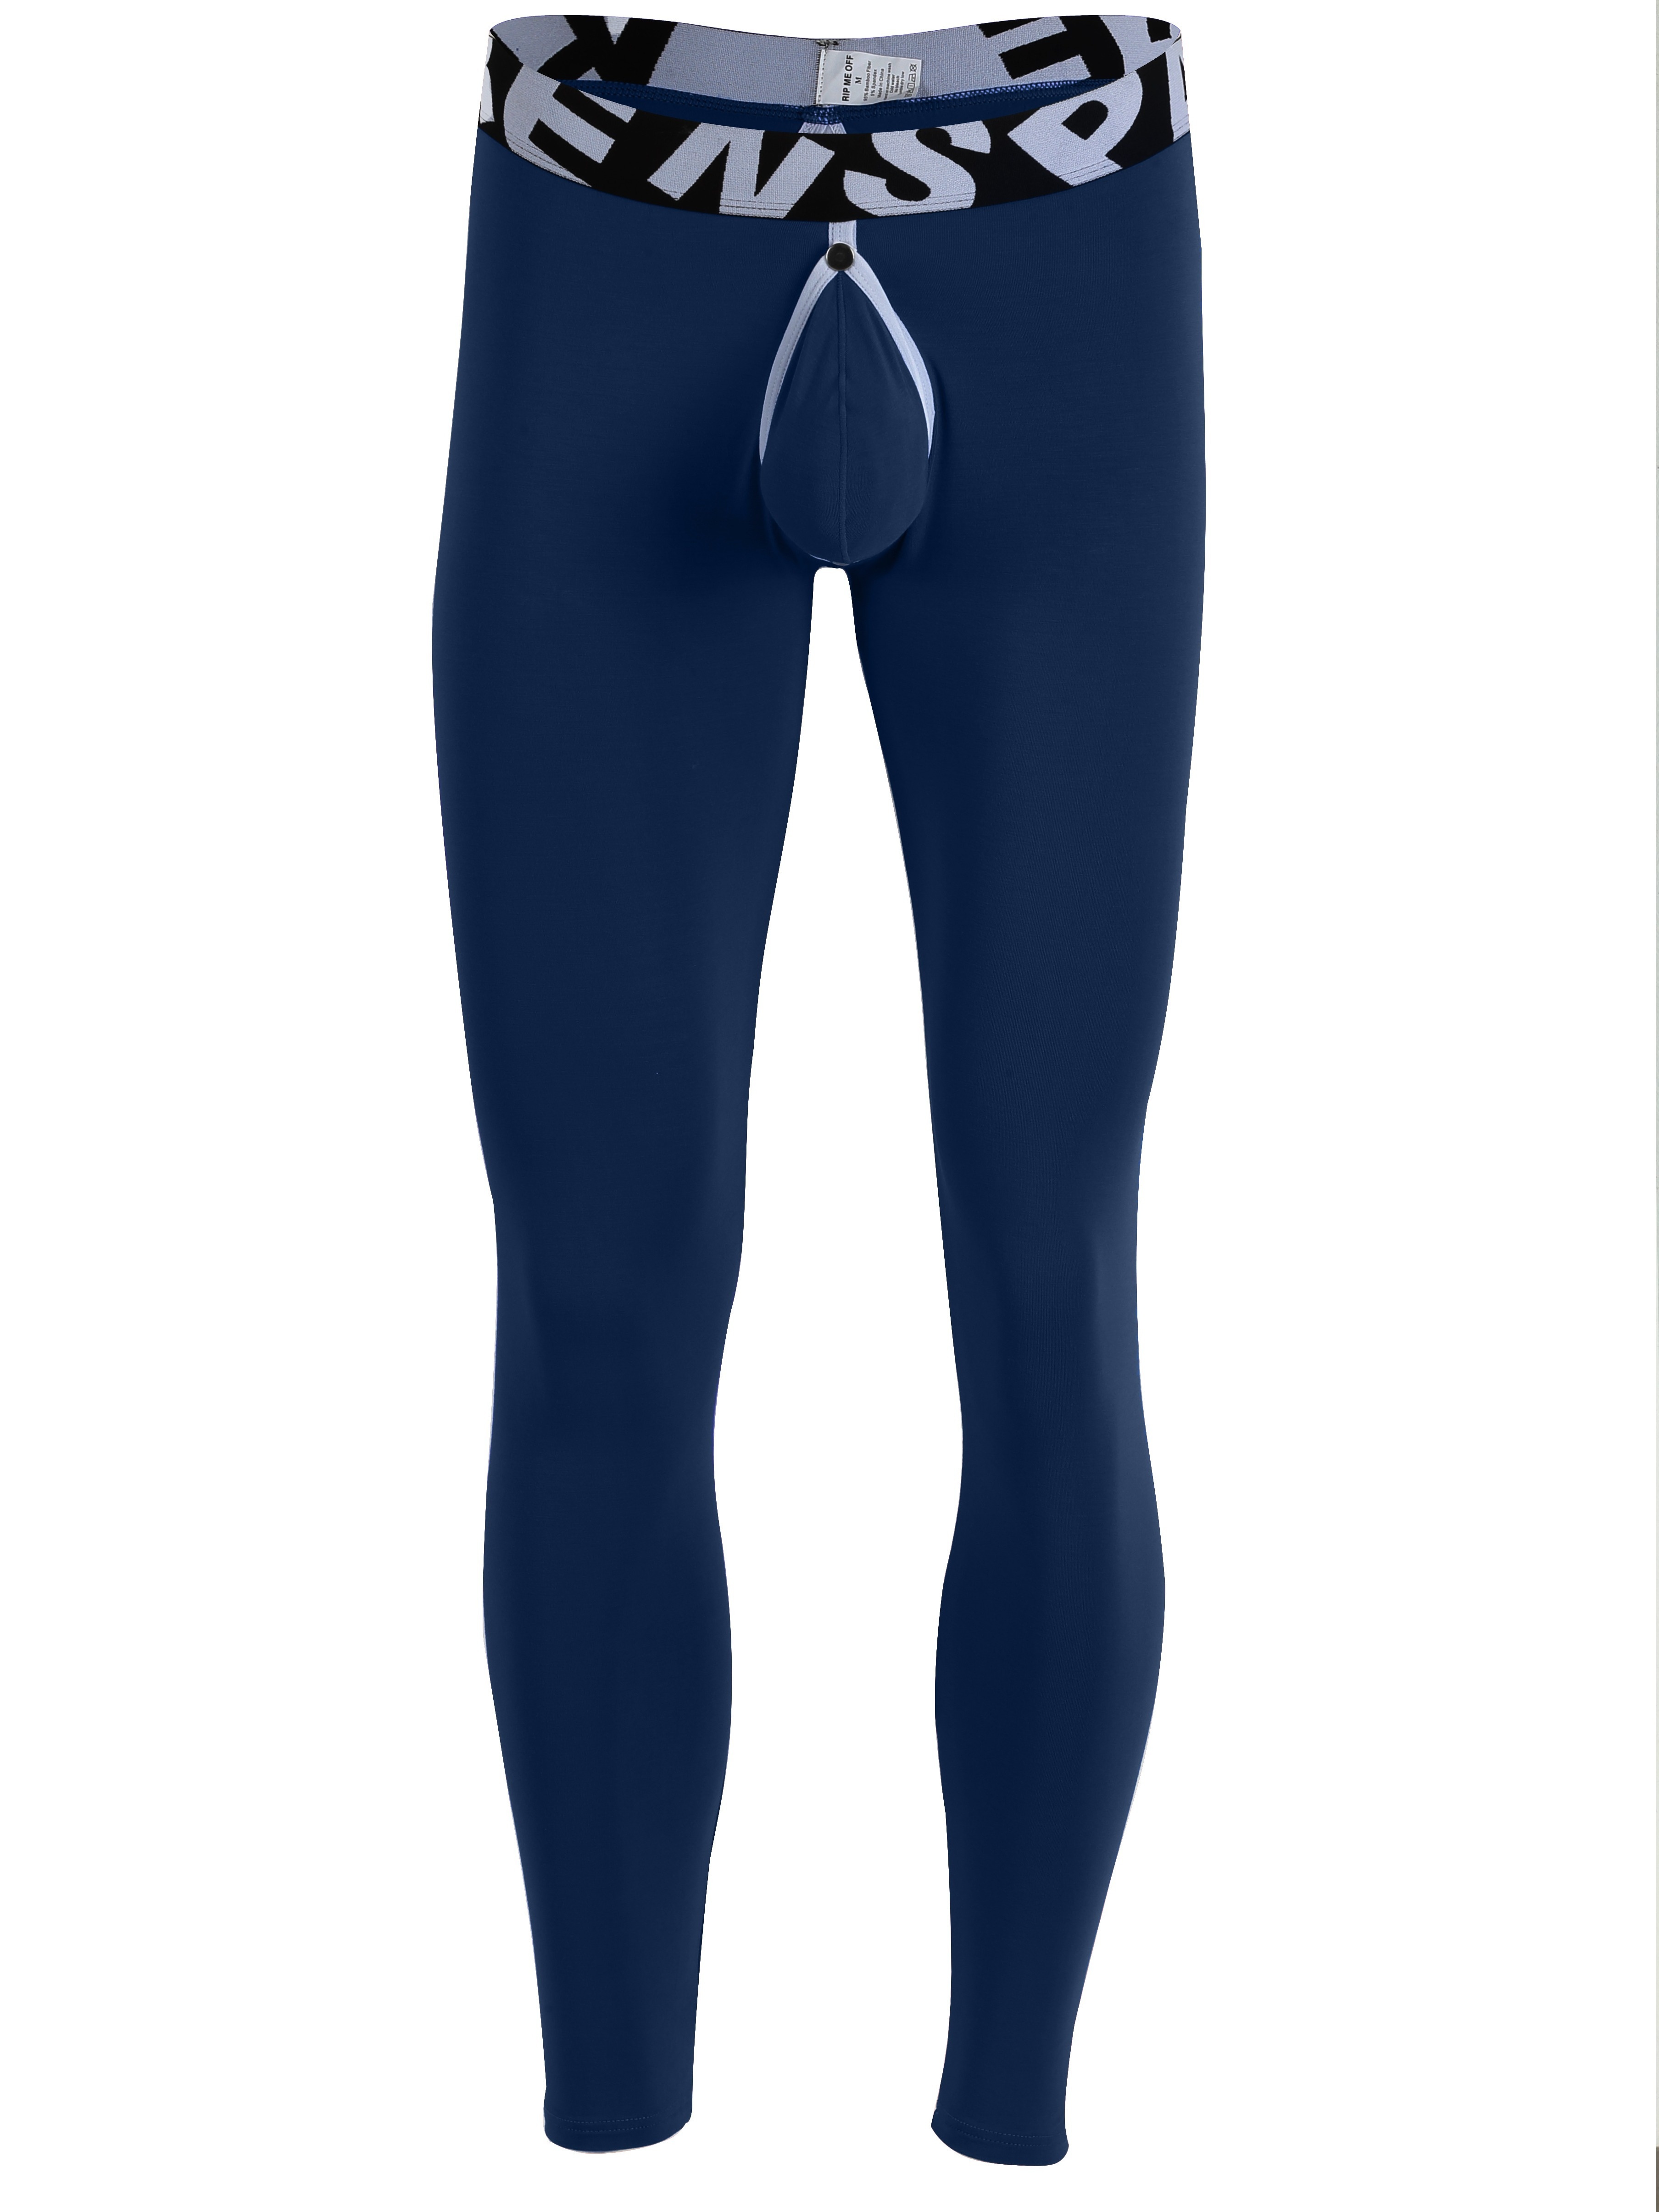 Under Armour Compression Heatgear Leggings Blue-Green Navy Size Small